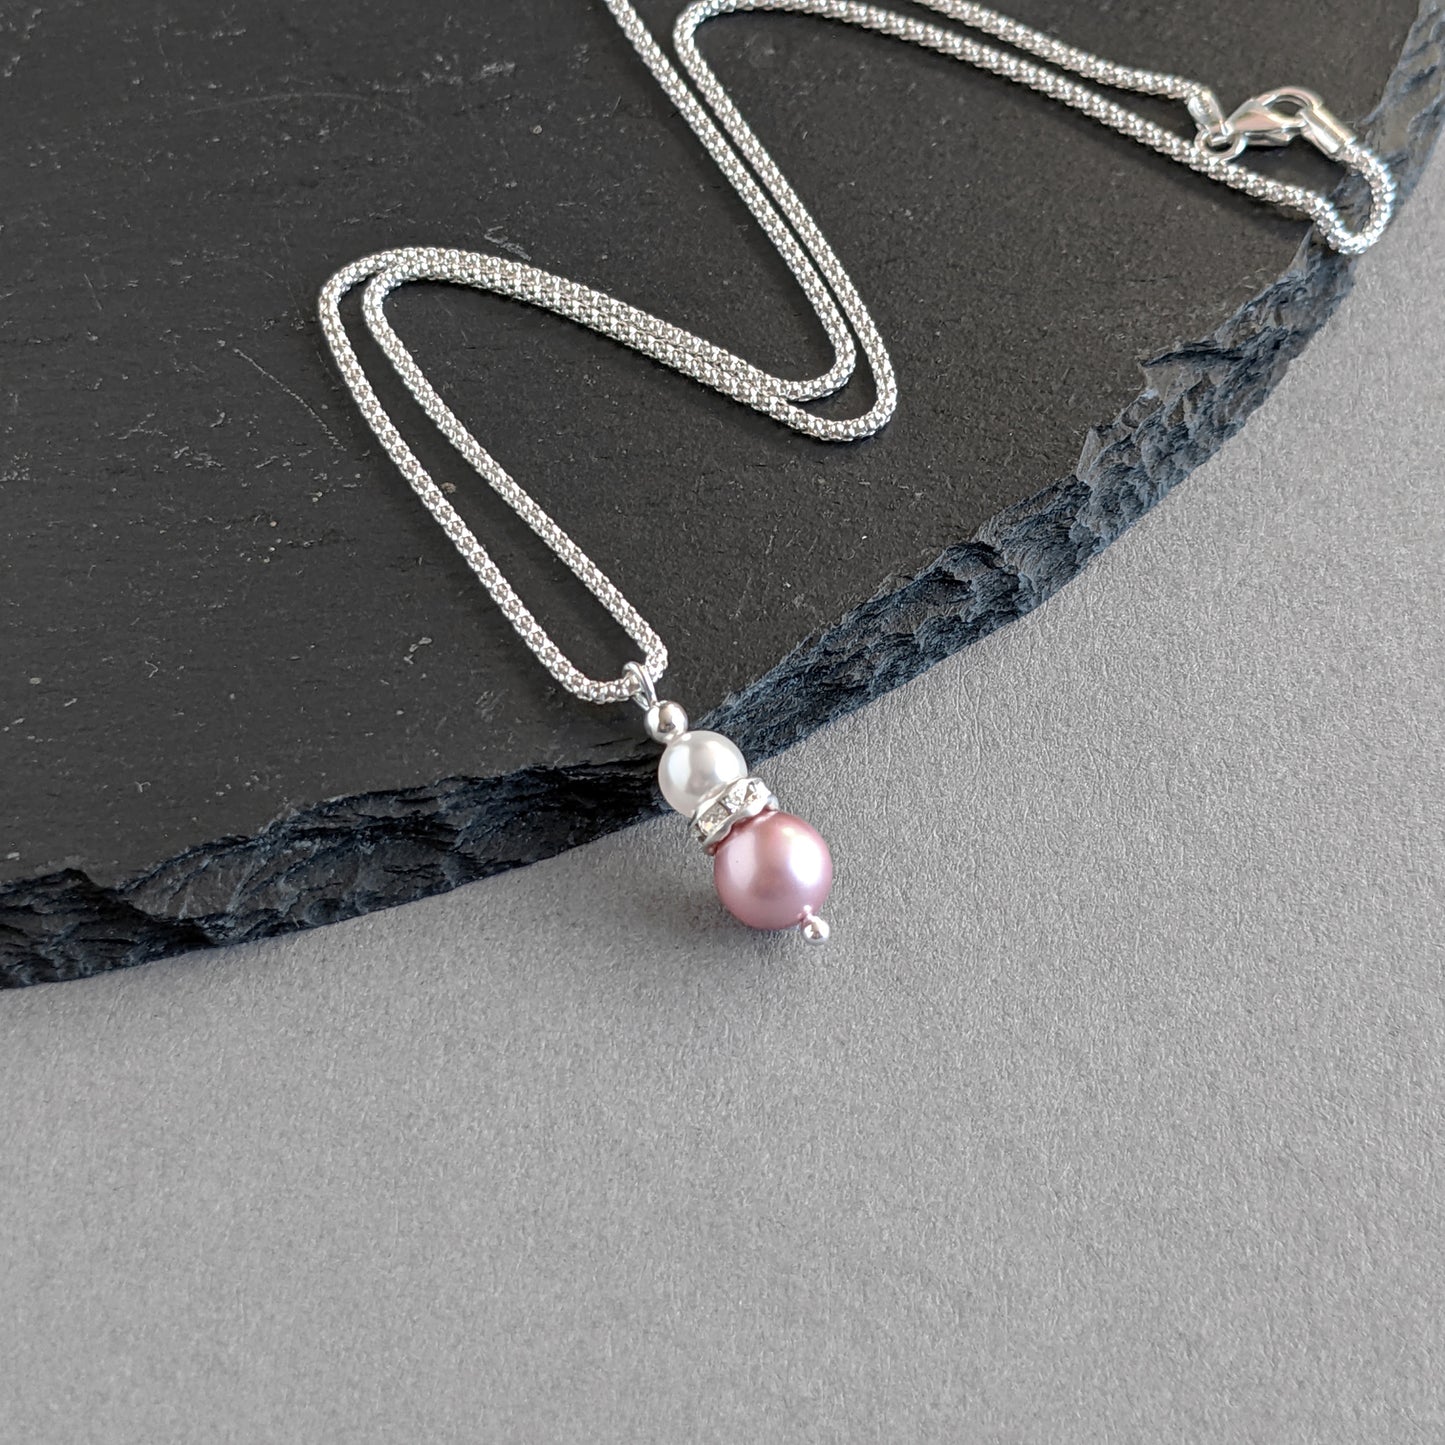 Dusty pink pearl pendant necklace